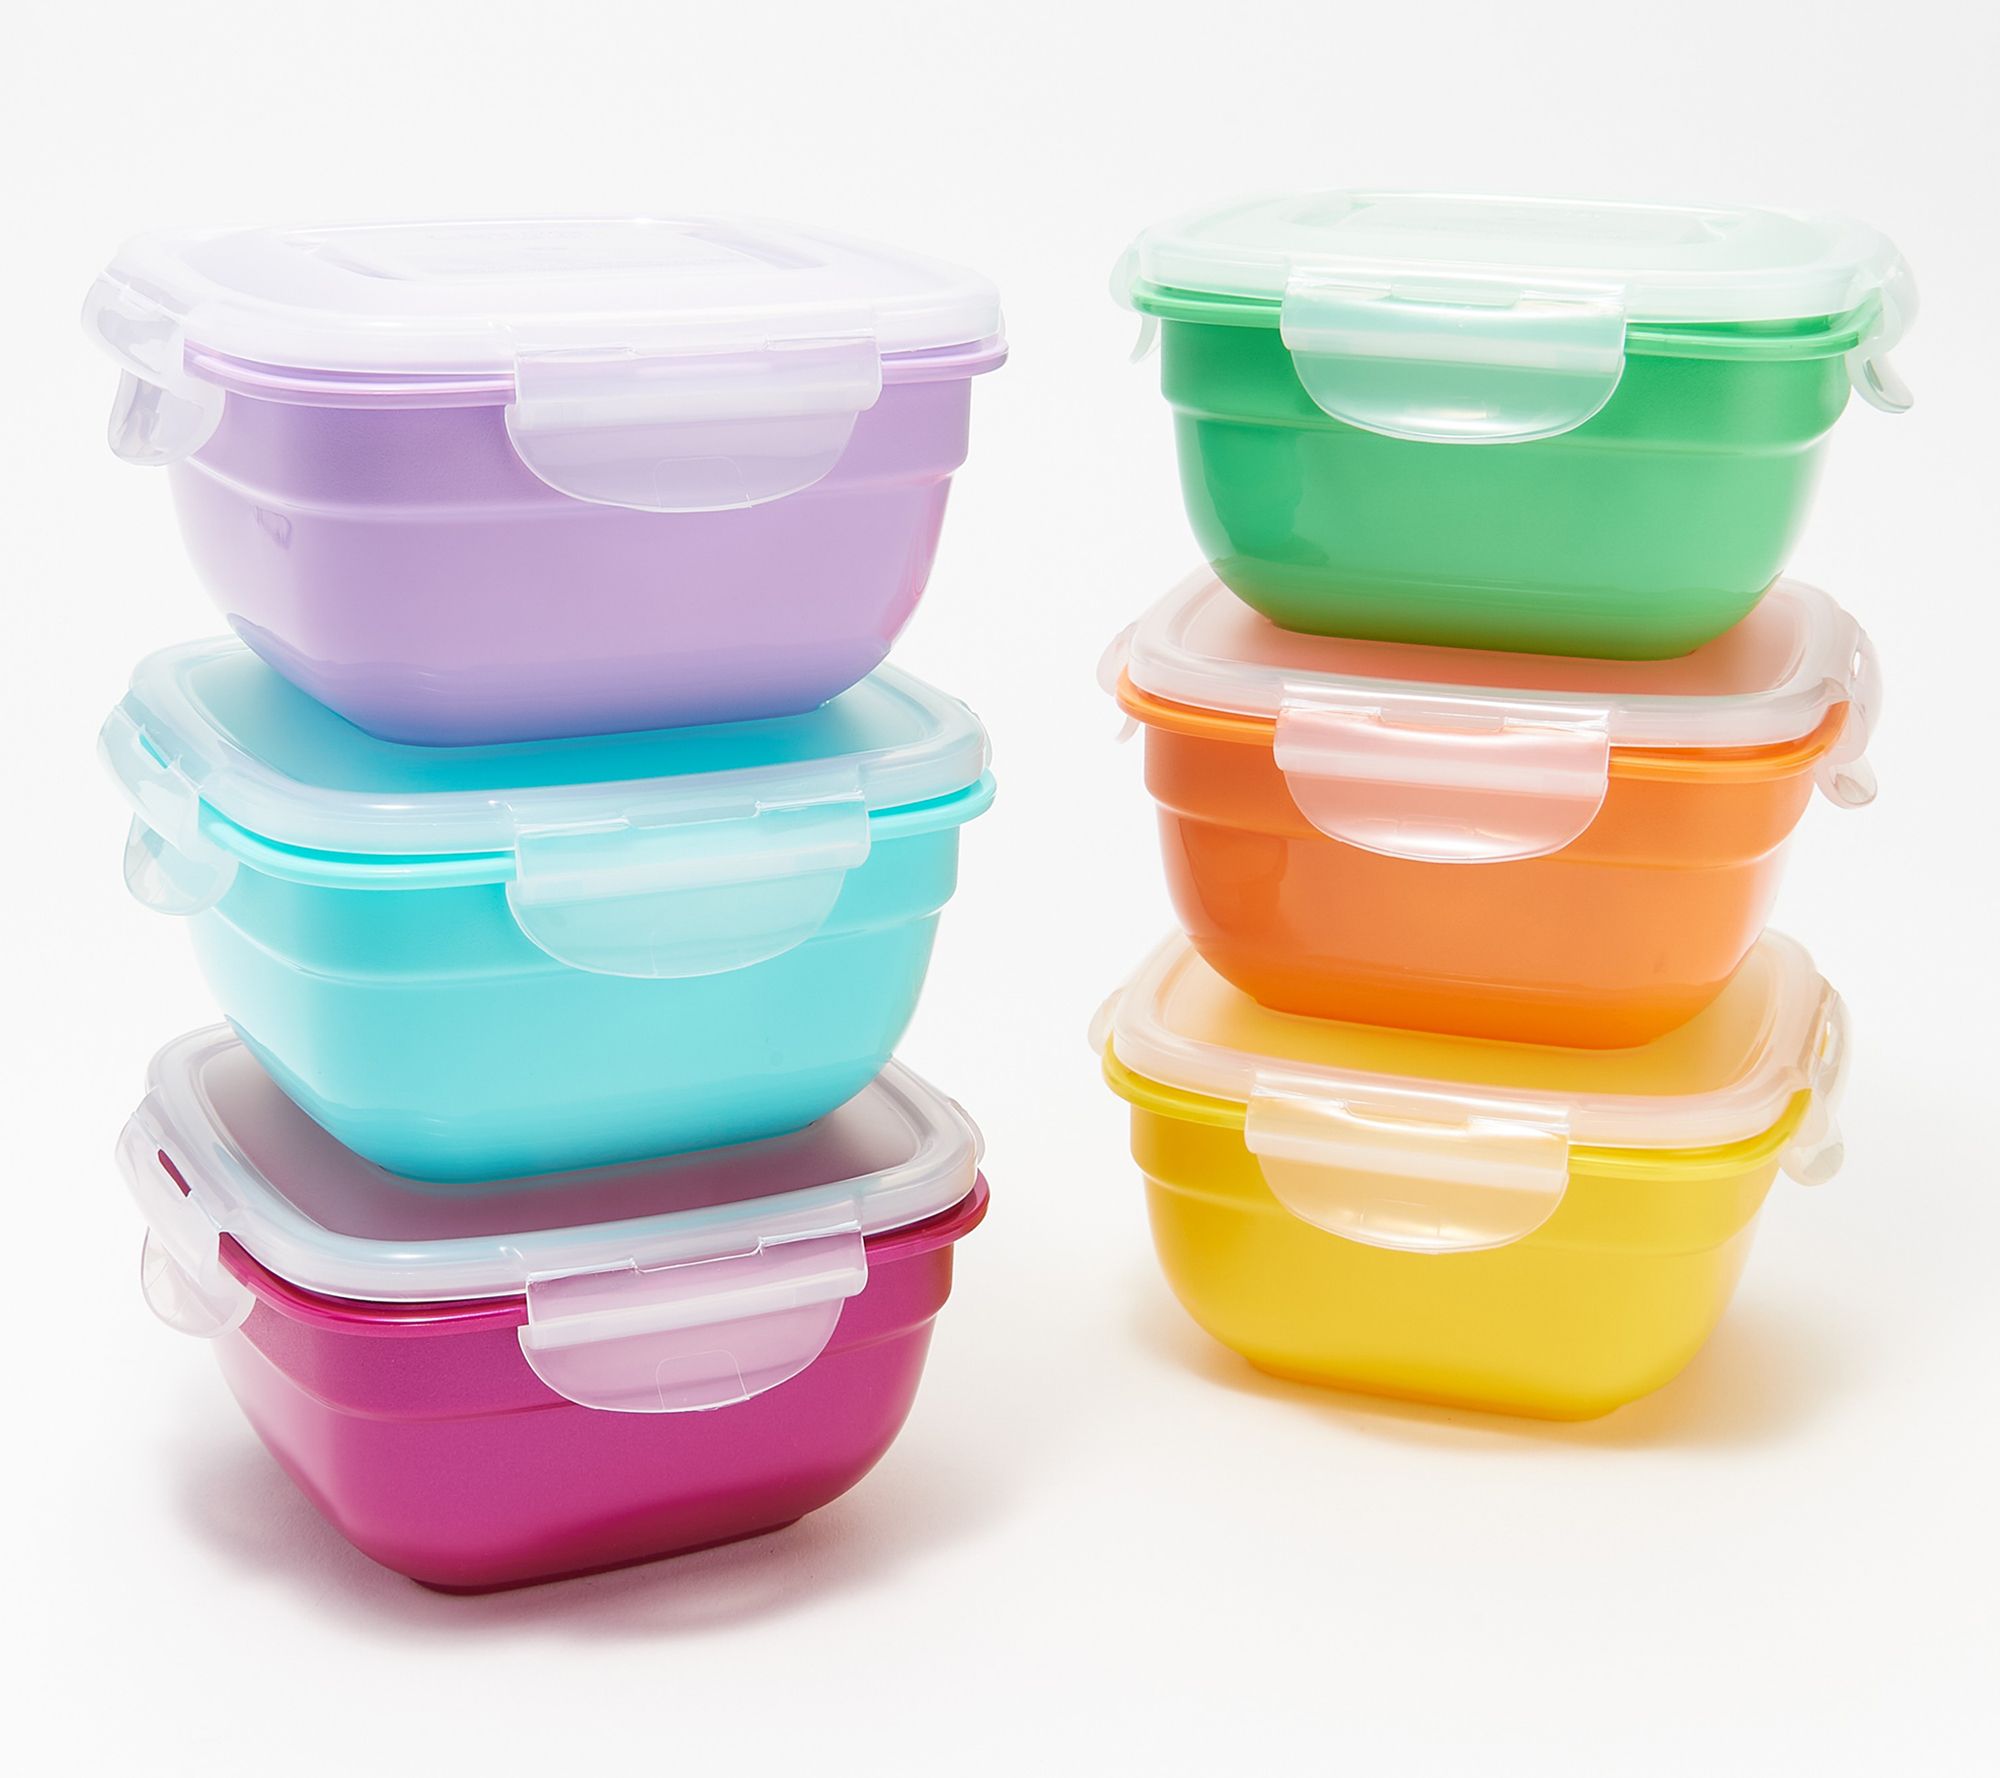  Mini Plastic Storage Containers with Locking Lids, 6